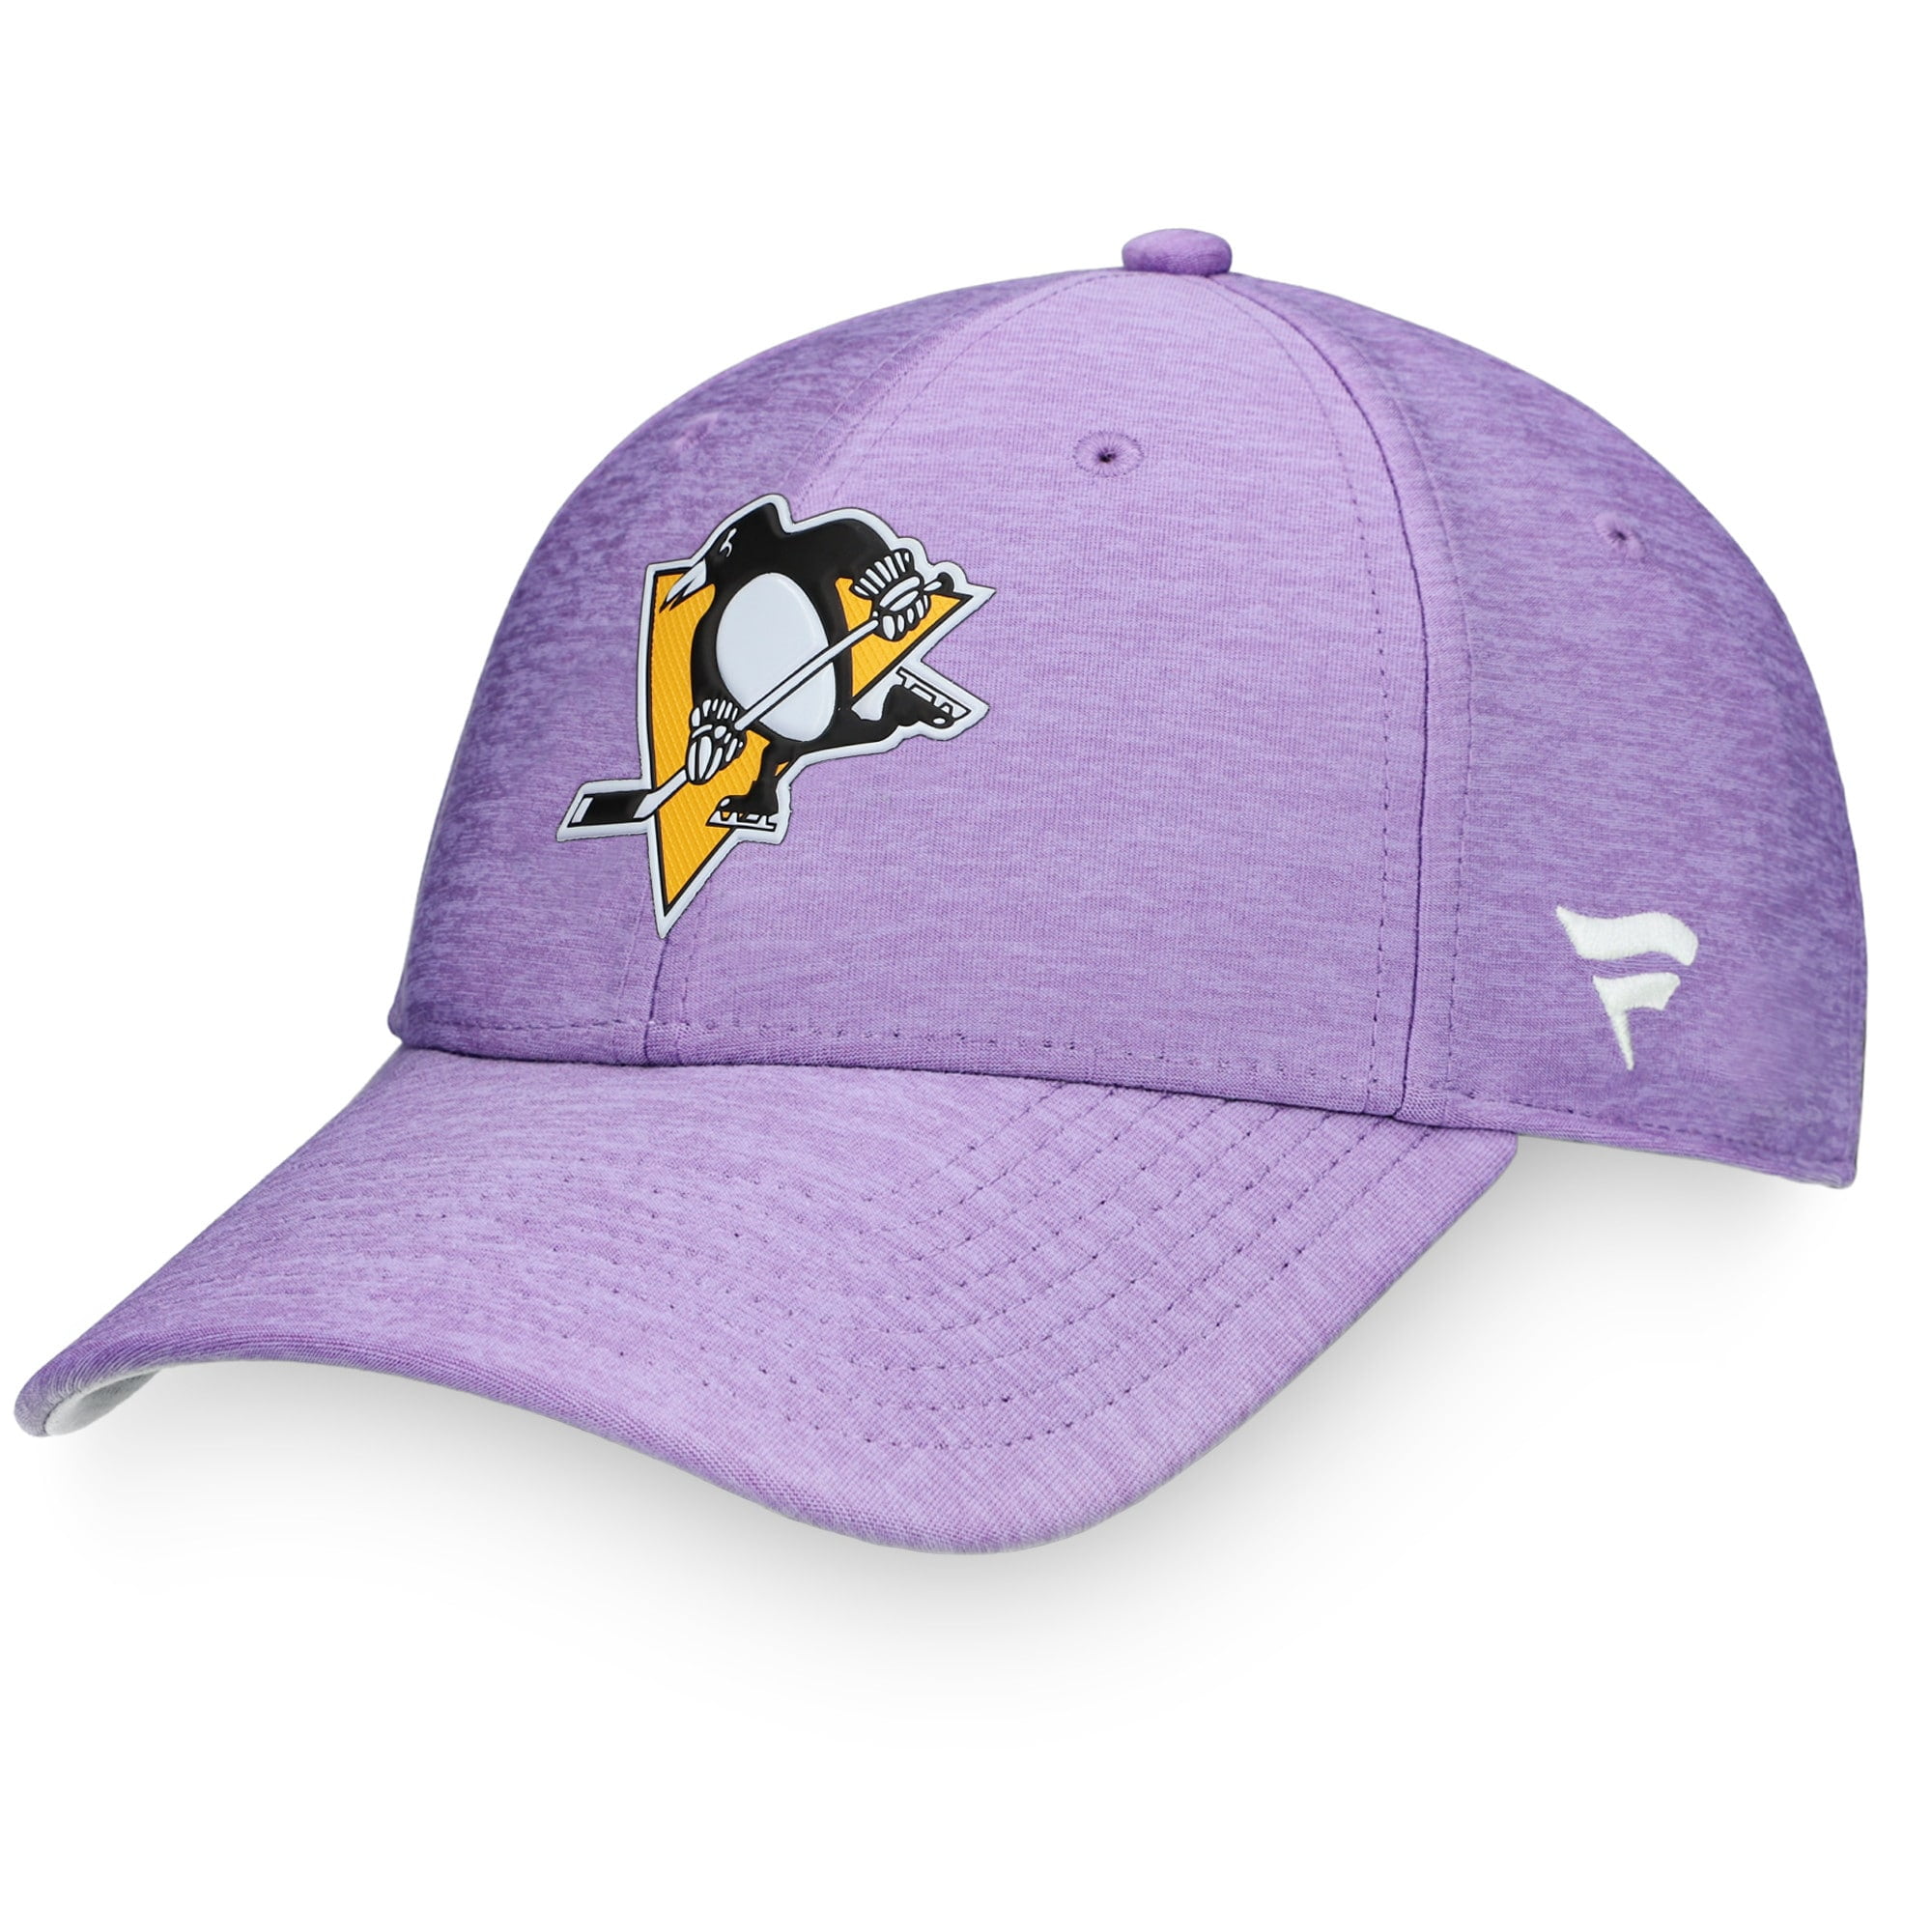 pittsburgh penguins hockey fights cancer